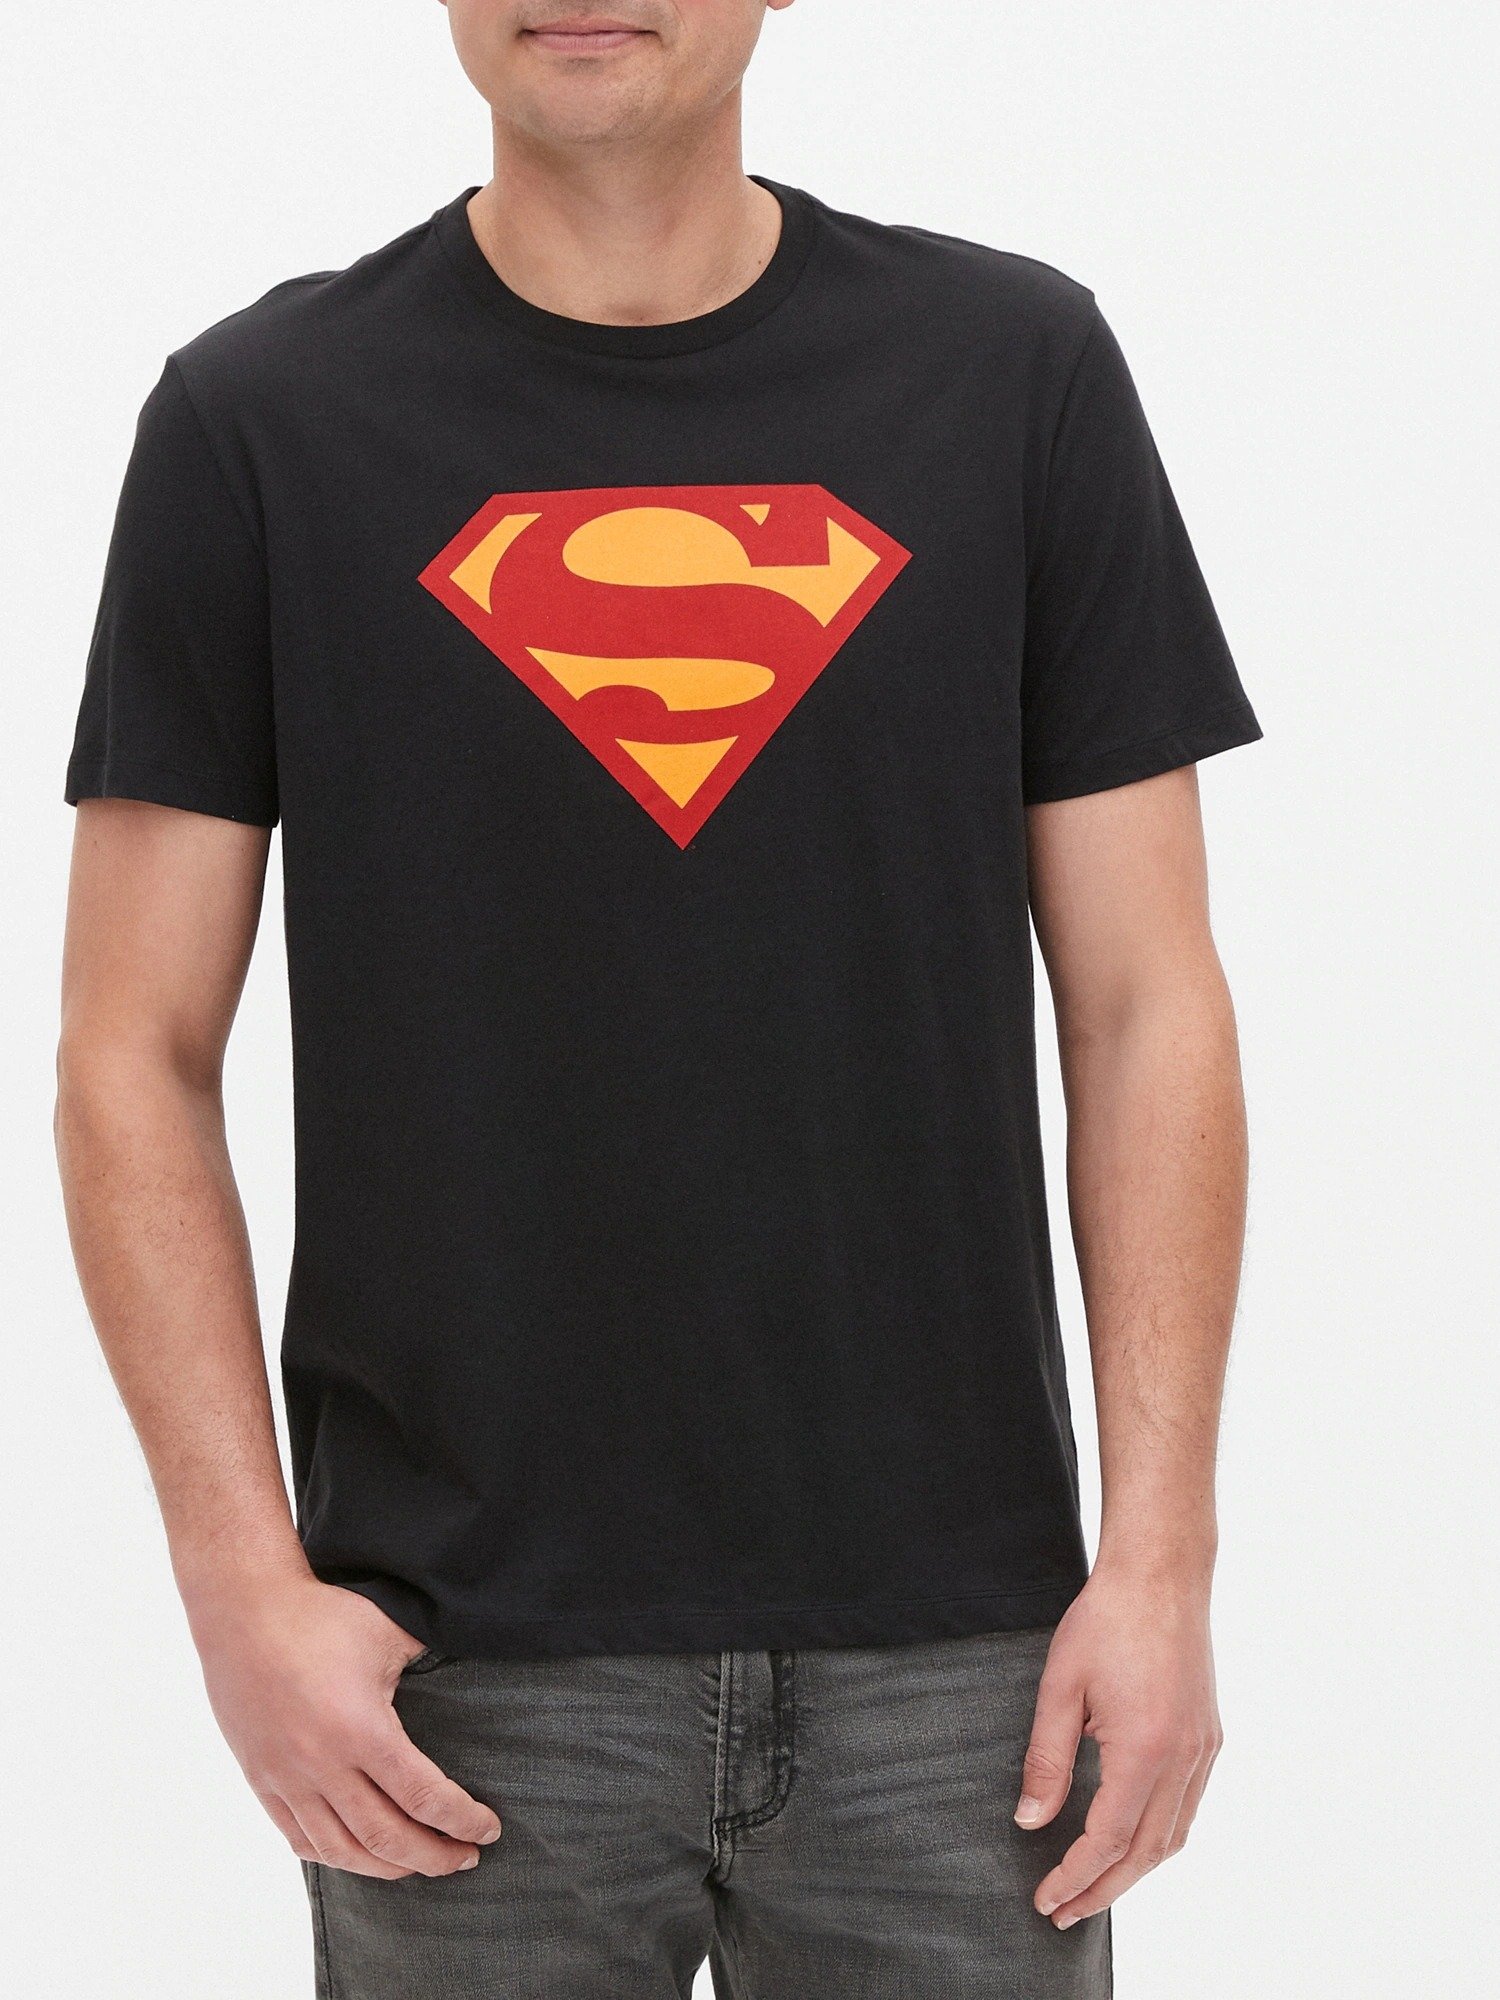 DC™ Superman Graphic T-Shirt product image